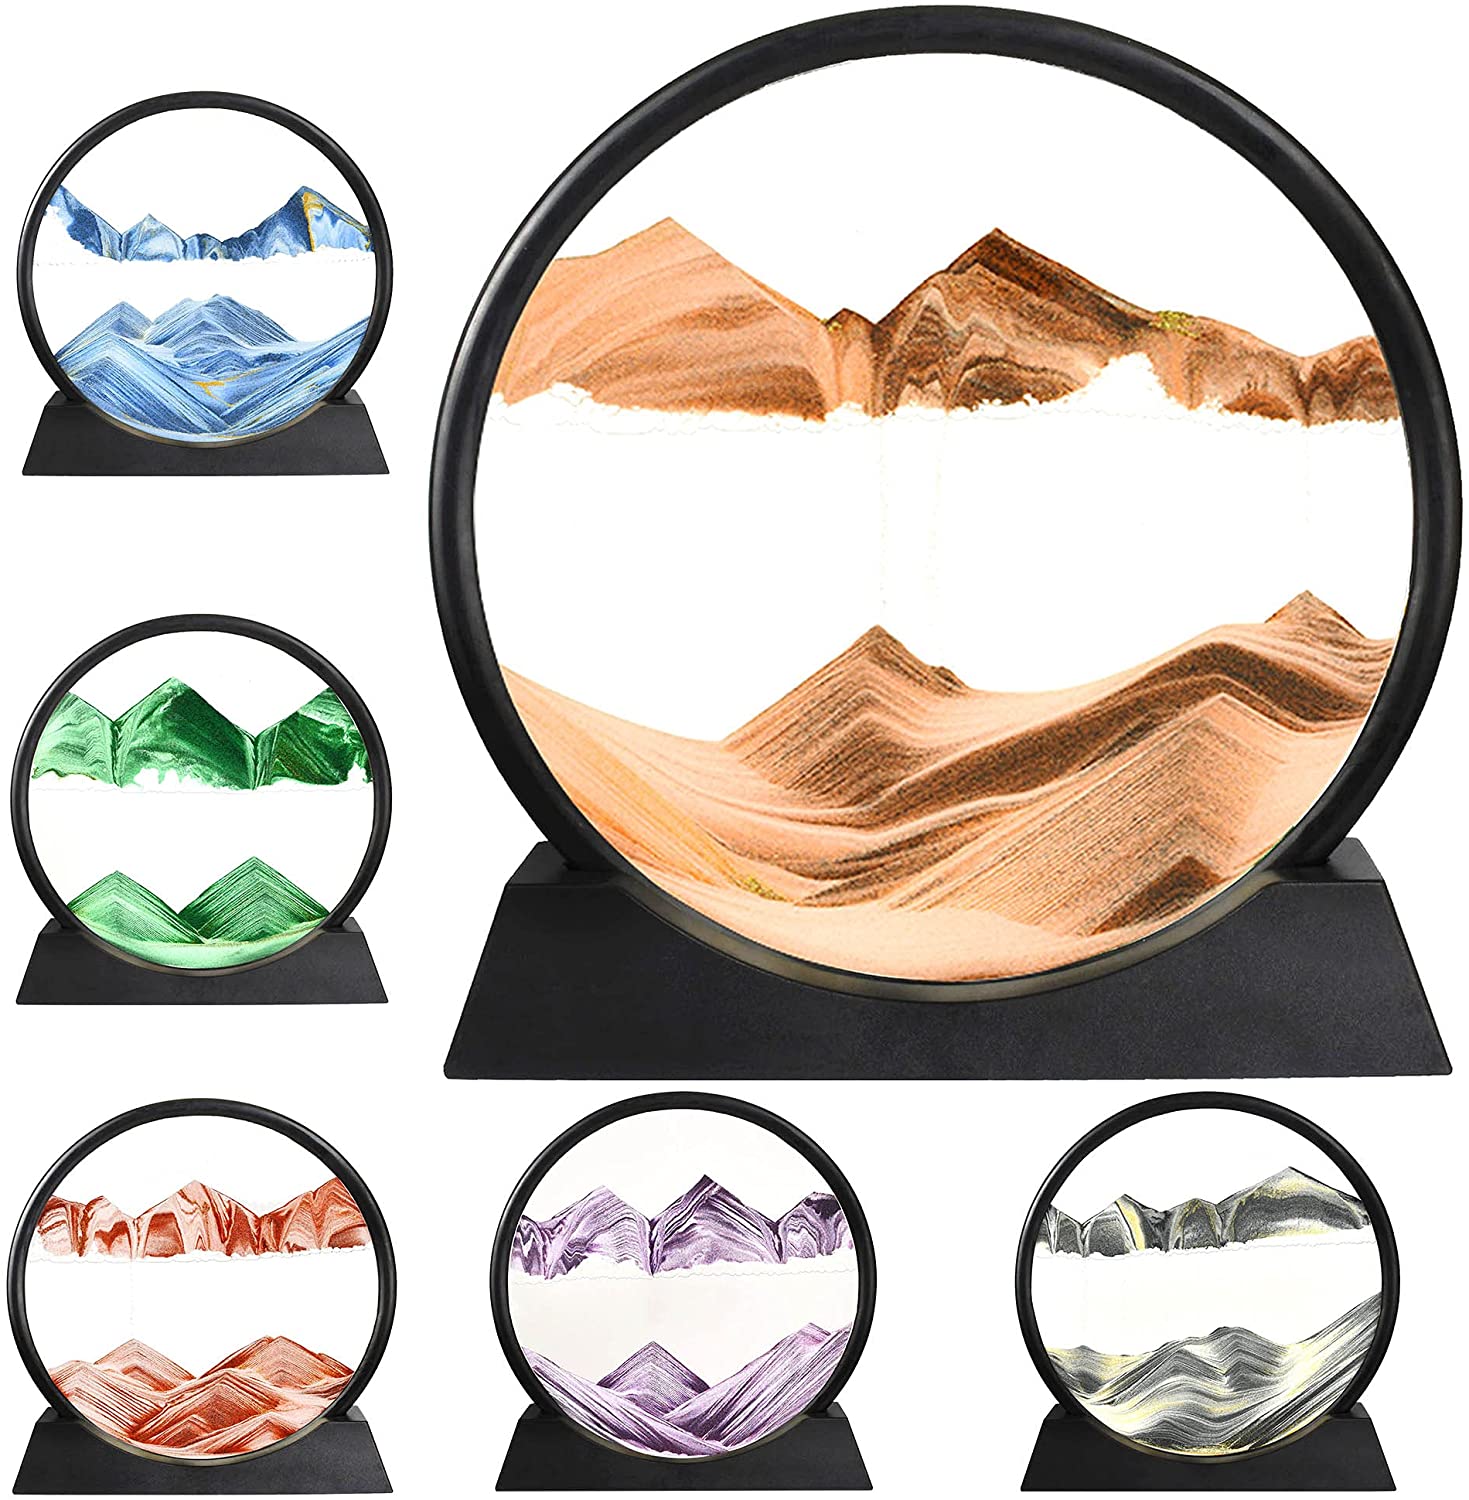 Hourglass Moving Sand Art Sand Landscapes in Motion 3D Deep Sea Ocean